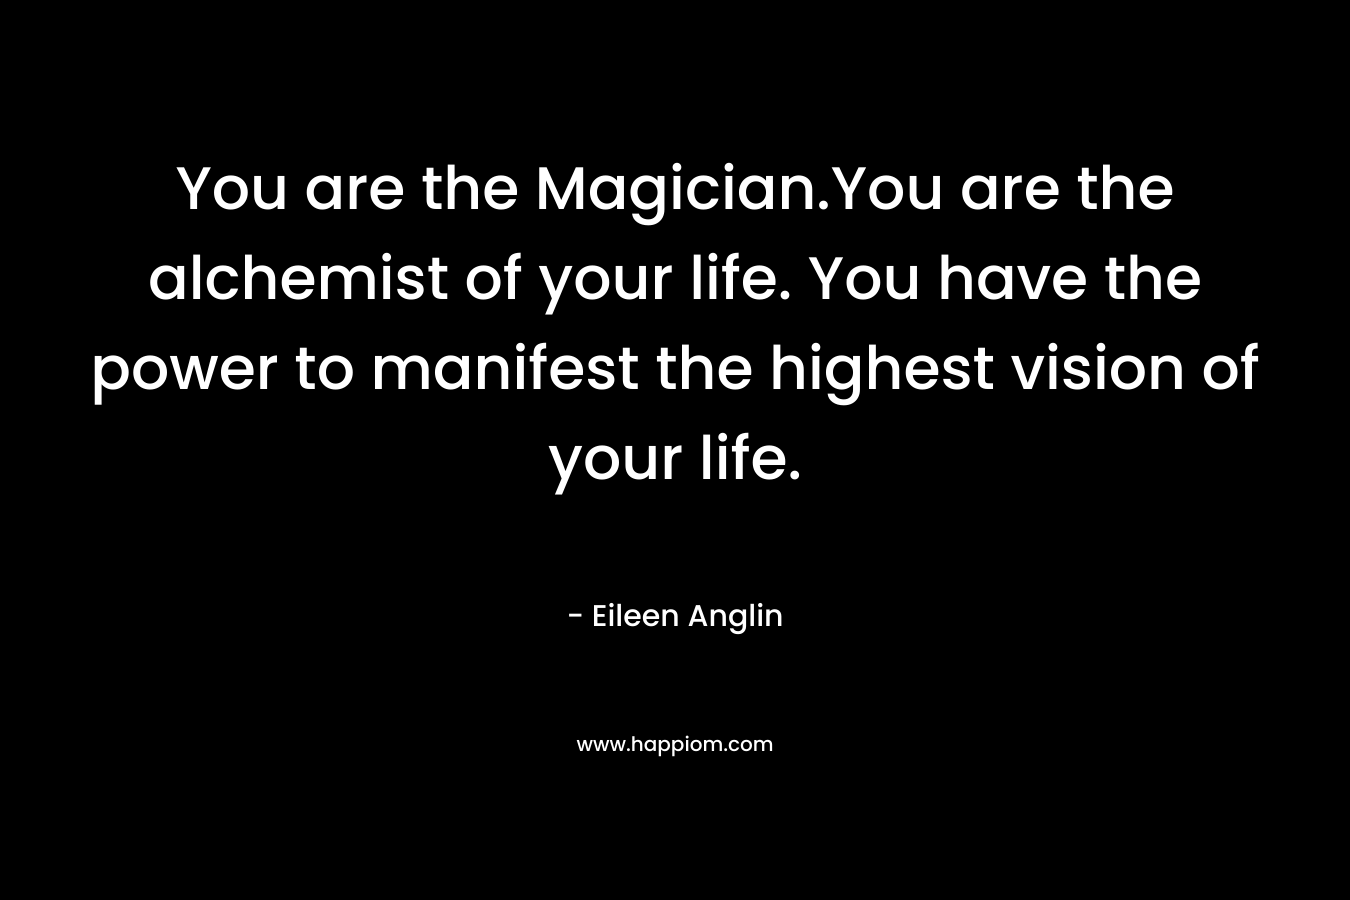 You are the Magician.You are the alchemist of your life. You have the power to manifest the highest vision of your life. – Eileen Anglin